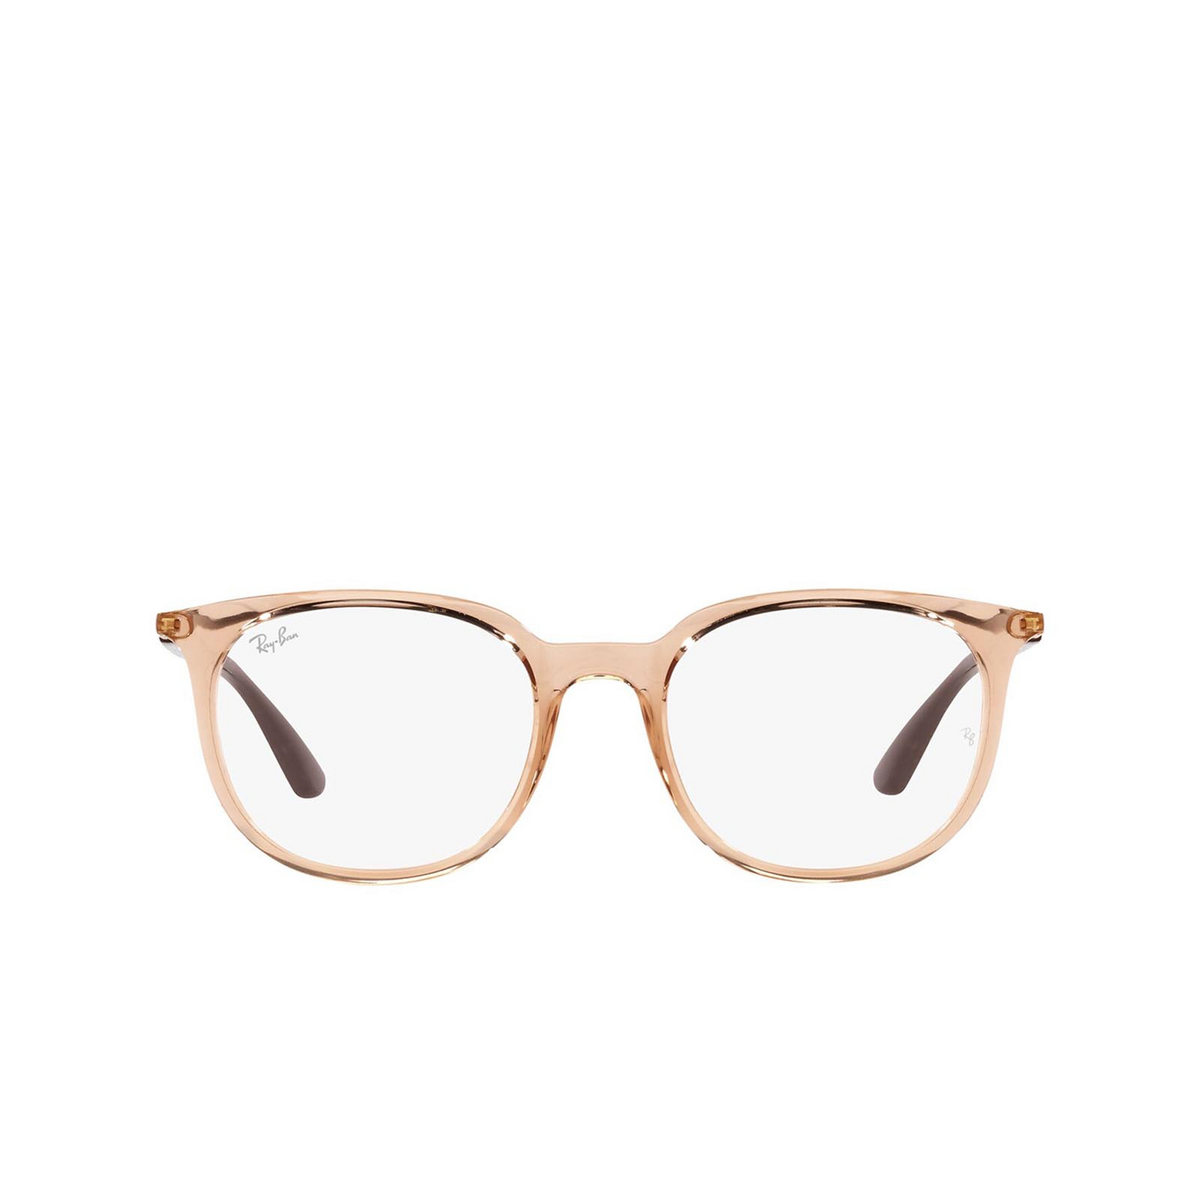 Ray-Ban RX7190 Eyeglasses 5940 Light Brown - front view